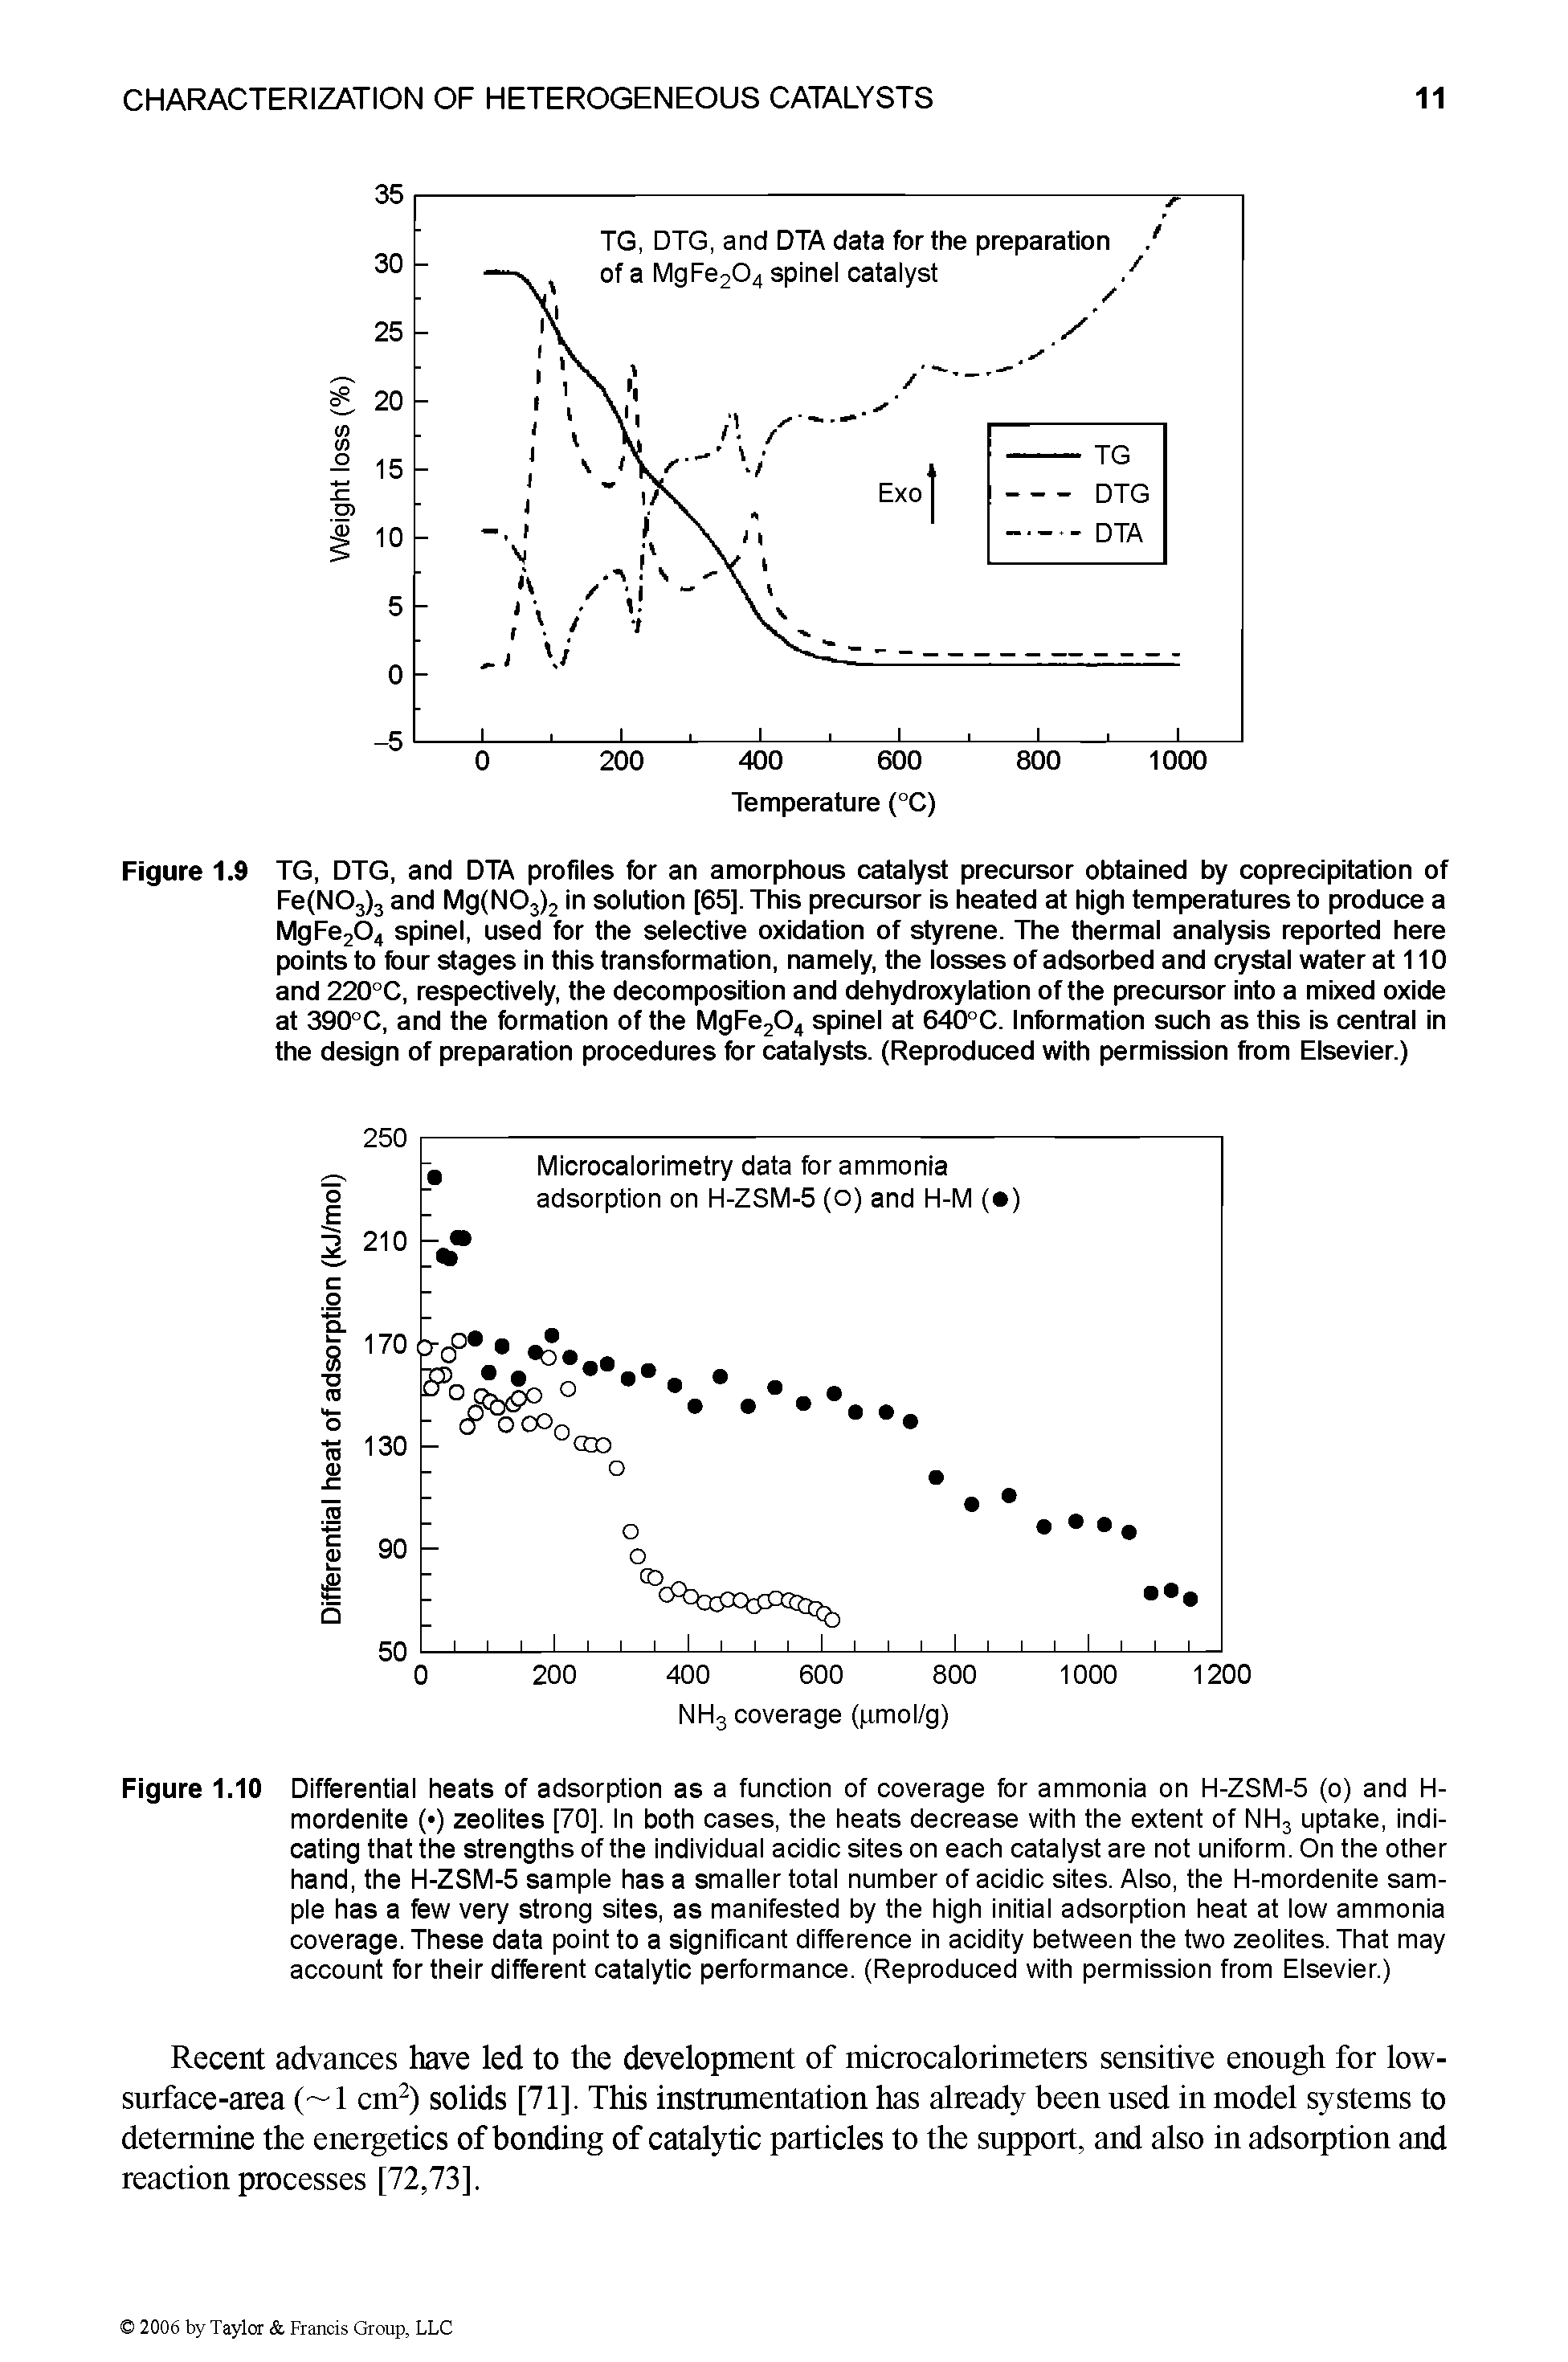 Figure 1.10 Differential heats of adsorption as a function of coverage for ammonia on H-ZSM-5 (o) and H-mordenite ( ) zeolites [70], In both cases, the heats decrease with the extent of NH3 uptake, indicating that the strengths of the individual acidic sites on each catalyst are not uniform. On the other hand, the H-ZSM-5 sample has a smaller total number of acidic sites. Also, the H-mordenite sample has a few very strong sites, as manifested by the high initial adsorption heat at low ammonia coverage. These data point to a significant difference in acidity between the two zeolites. That may account for their different catalytic performance. (Reproduced with permission from Elsevier.)...